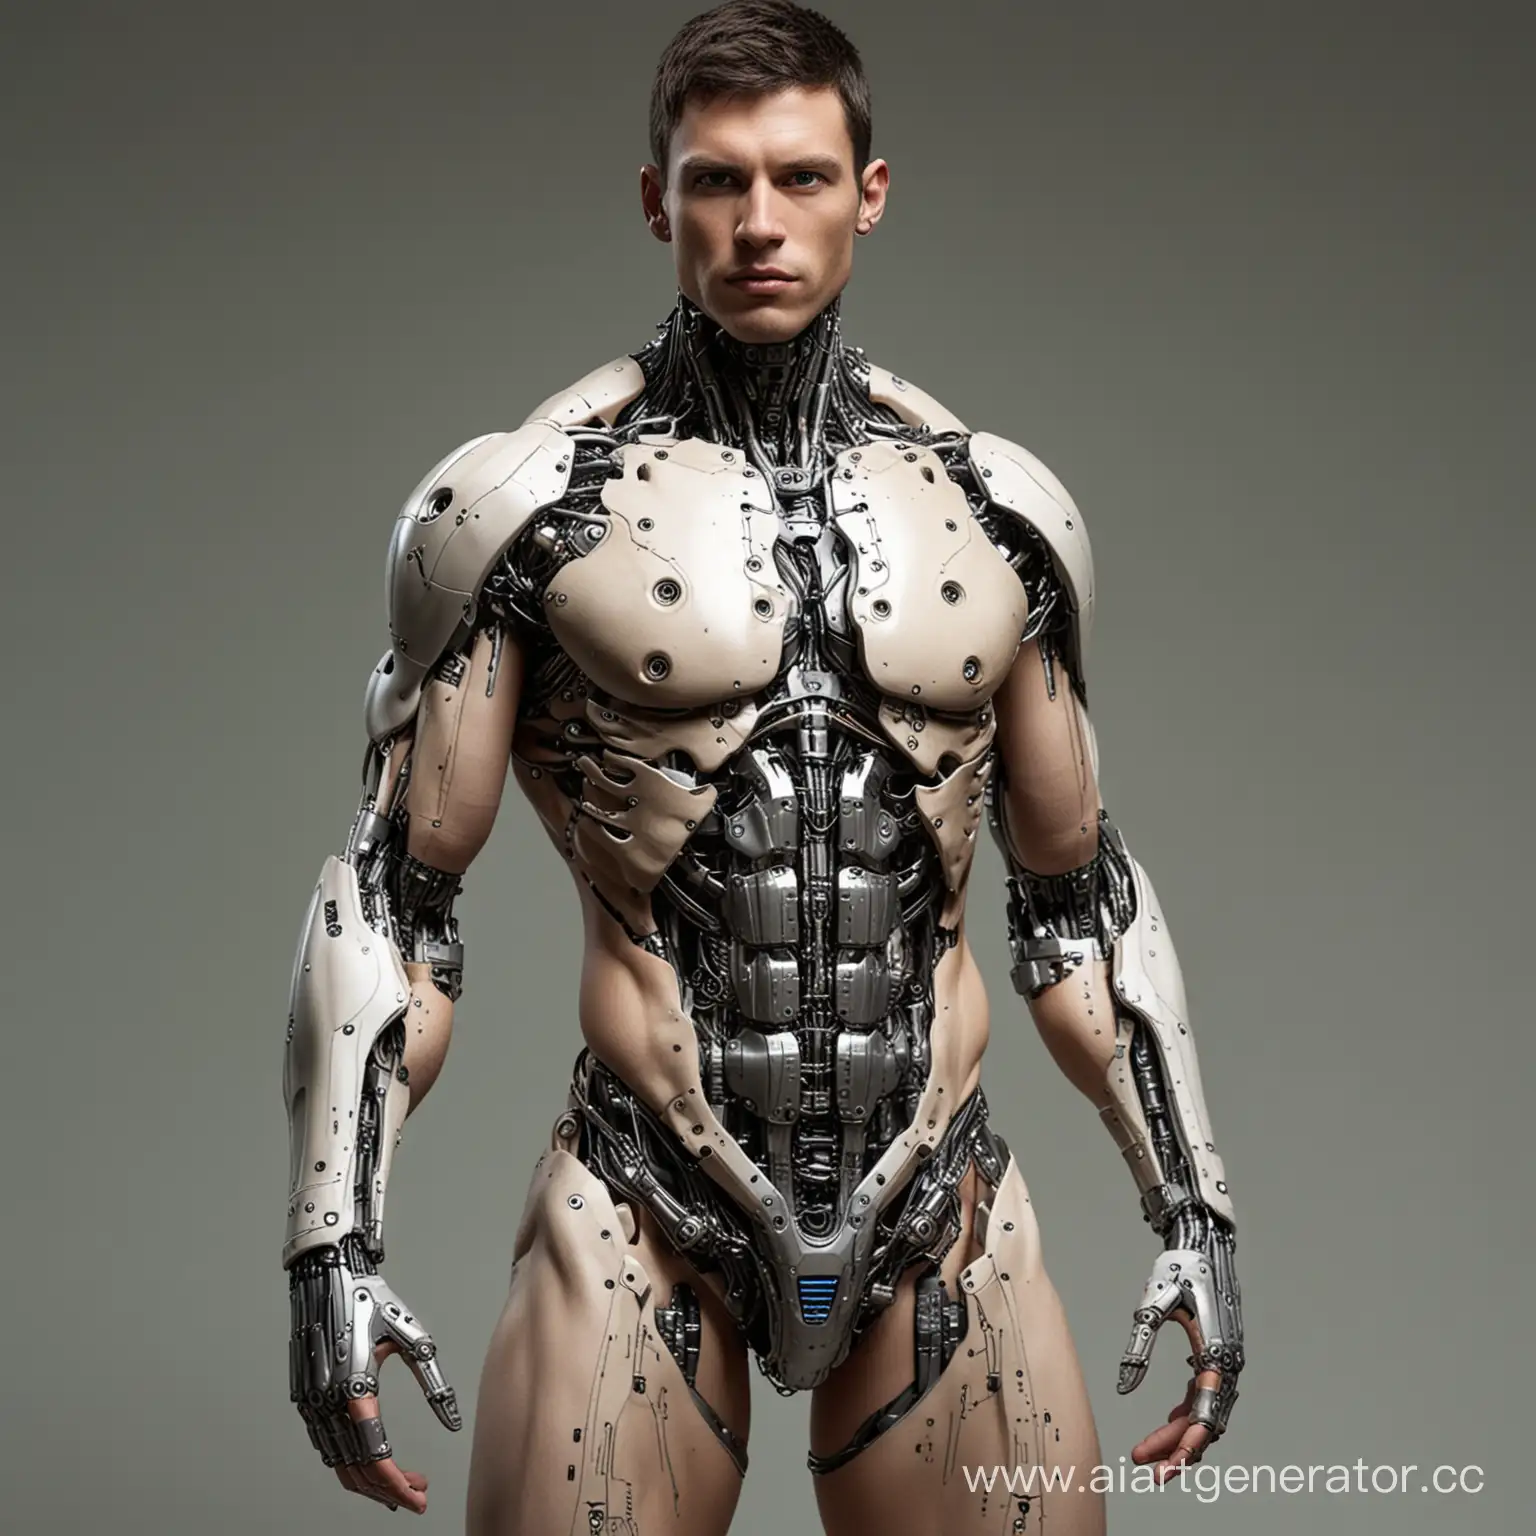 Cyborg-Man-Without-Clothes-in-Futuristic-Setting